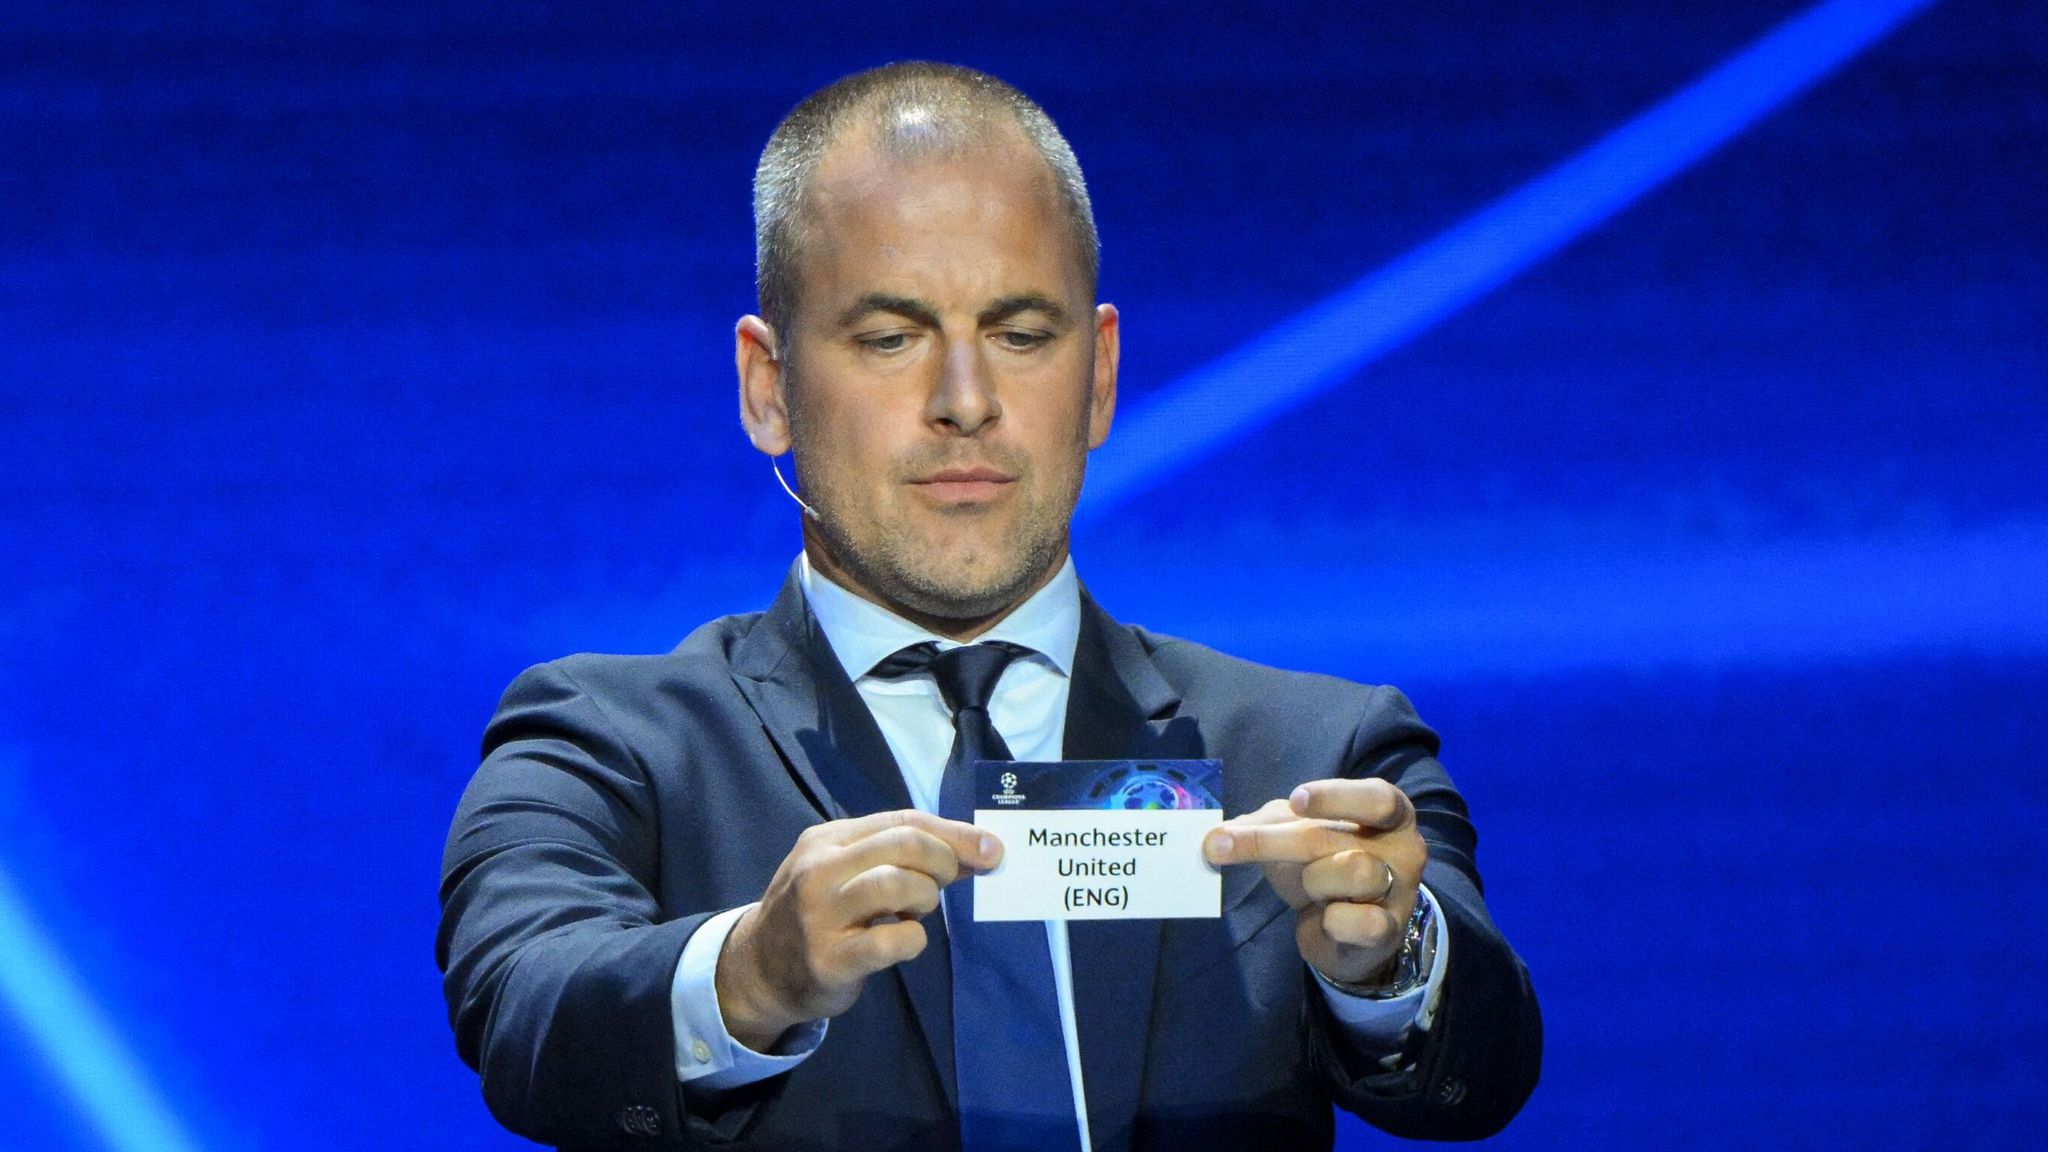 UEFA Champions League draw: Group stage matchups for 2023-24